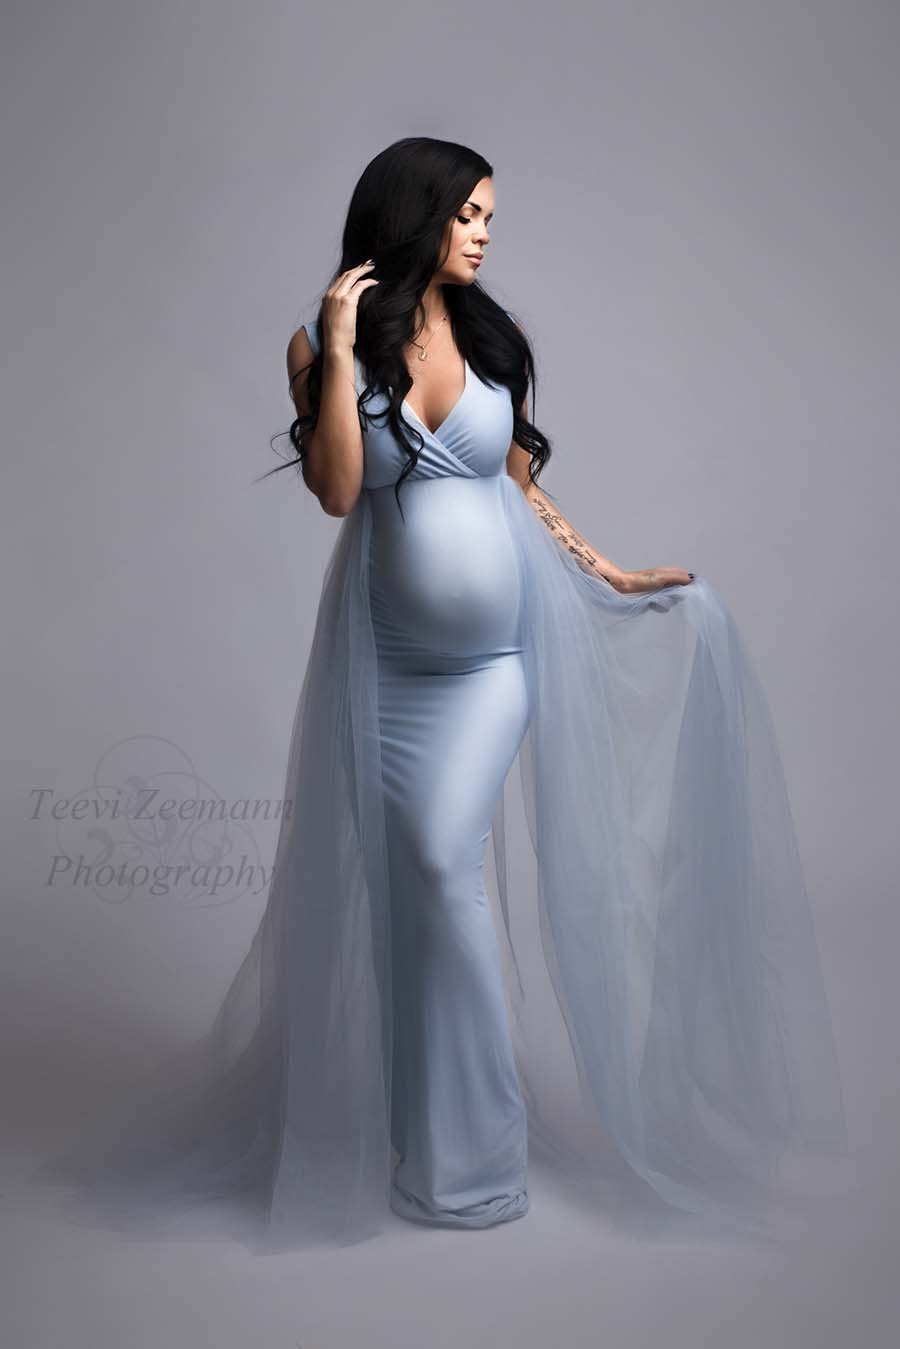 pregnant model wears a light blue dress without sleeves and a adjustable sweetheart top. she has her eyes closed and holds the tulle train from the dress with one hand while the other is resting on her hair.